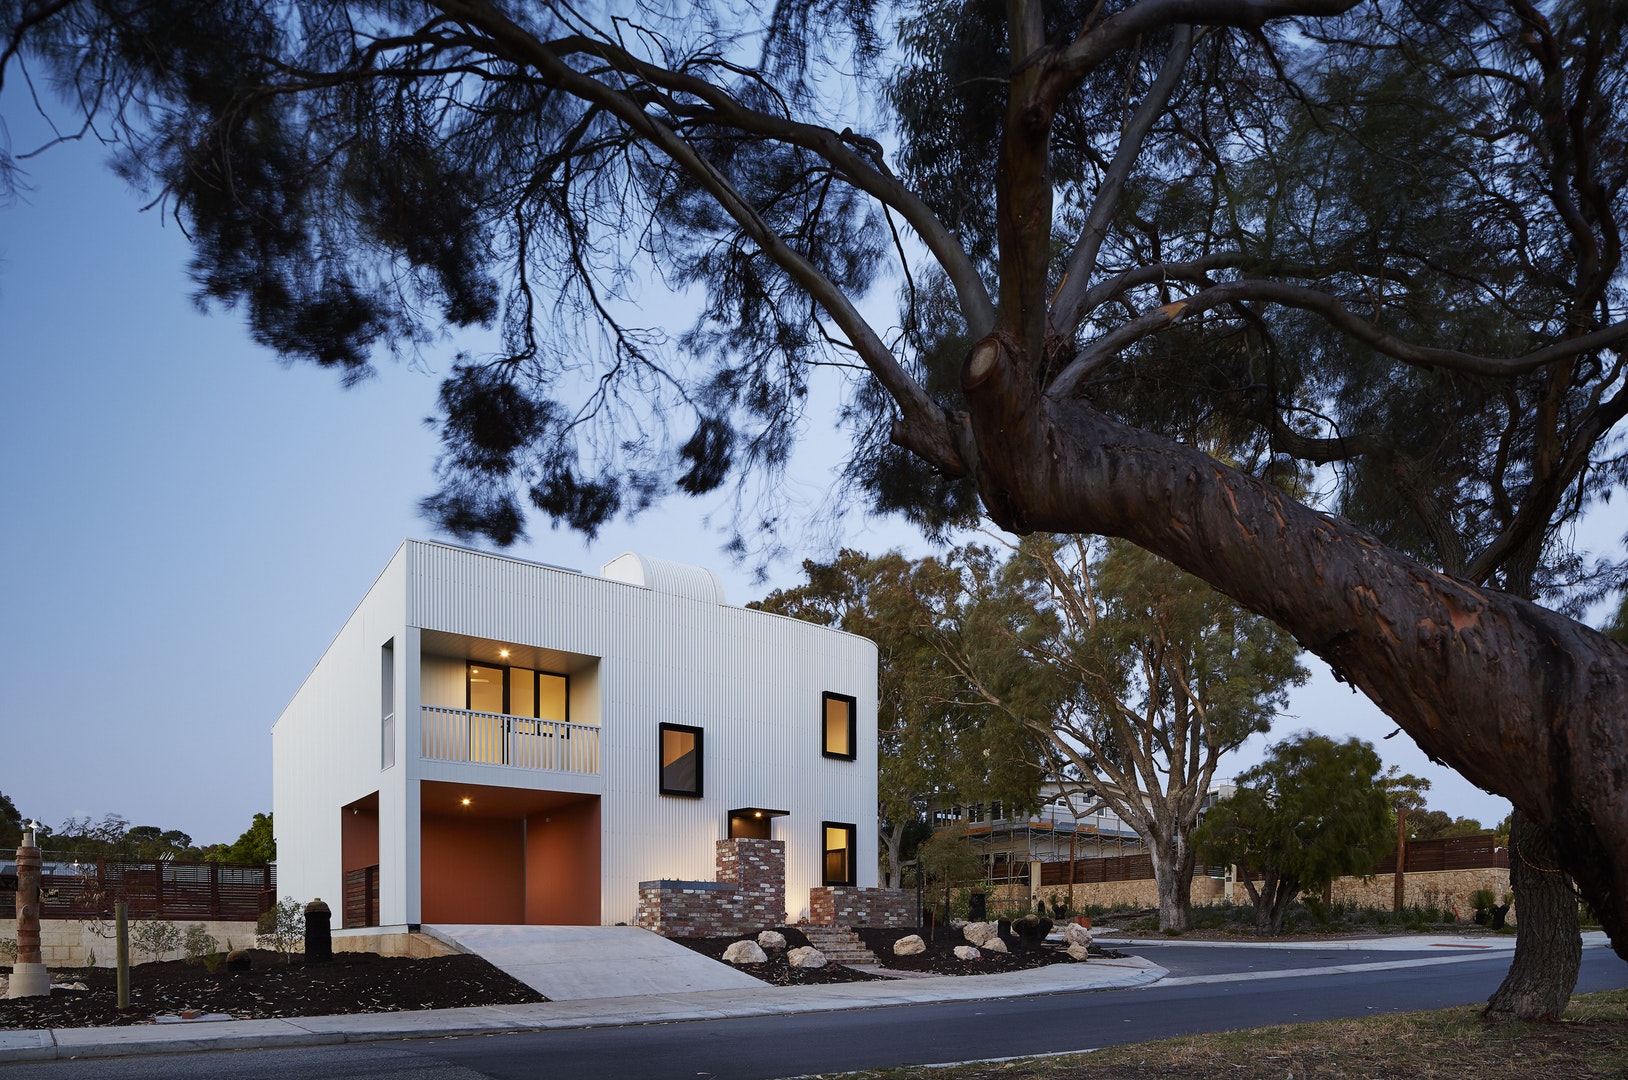 Residential Houses – Multi-residential – Gen Y house by David Barr Architect. Photo by Robert Frith.